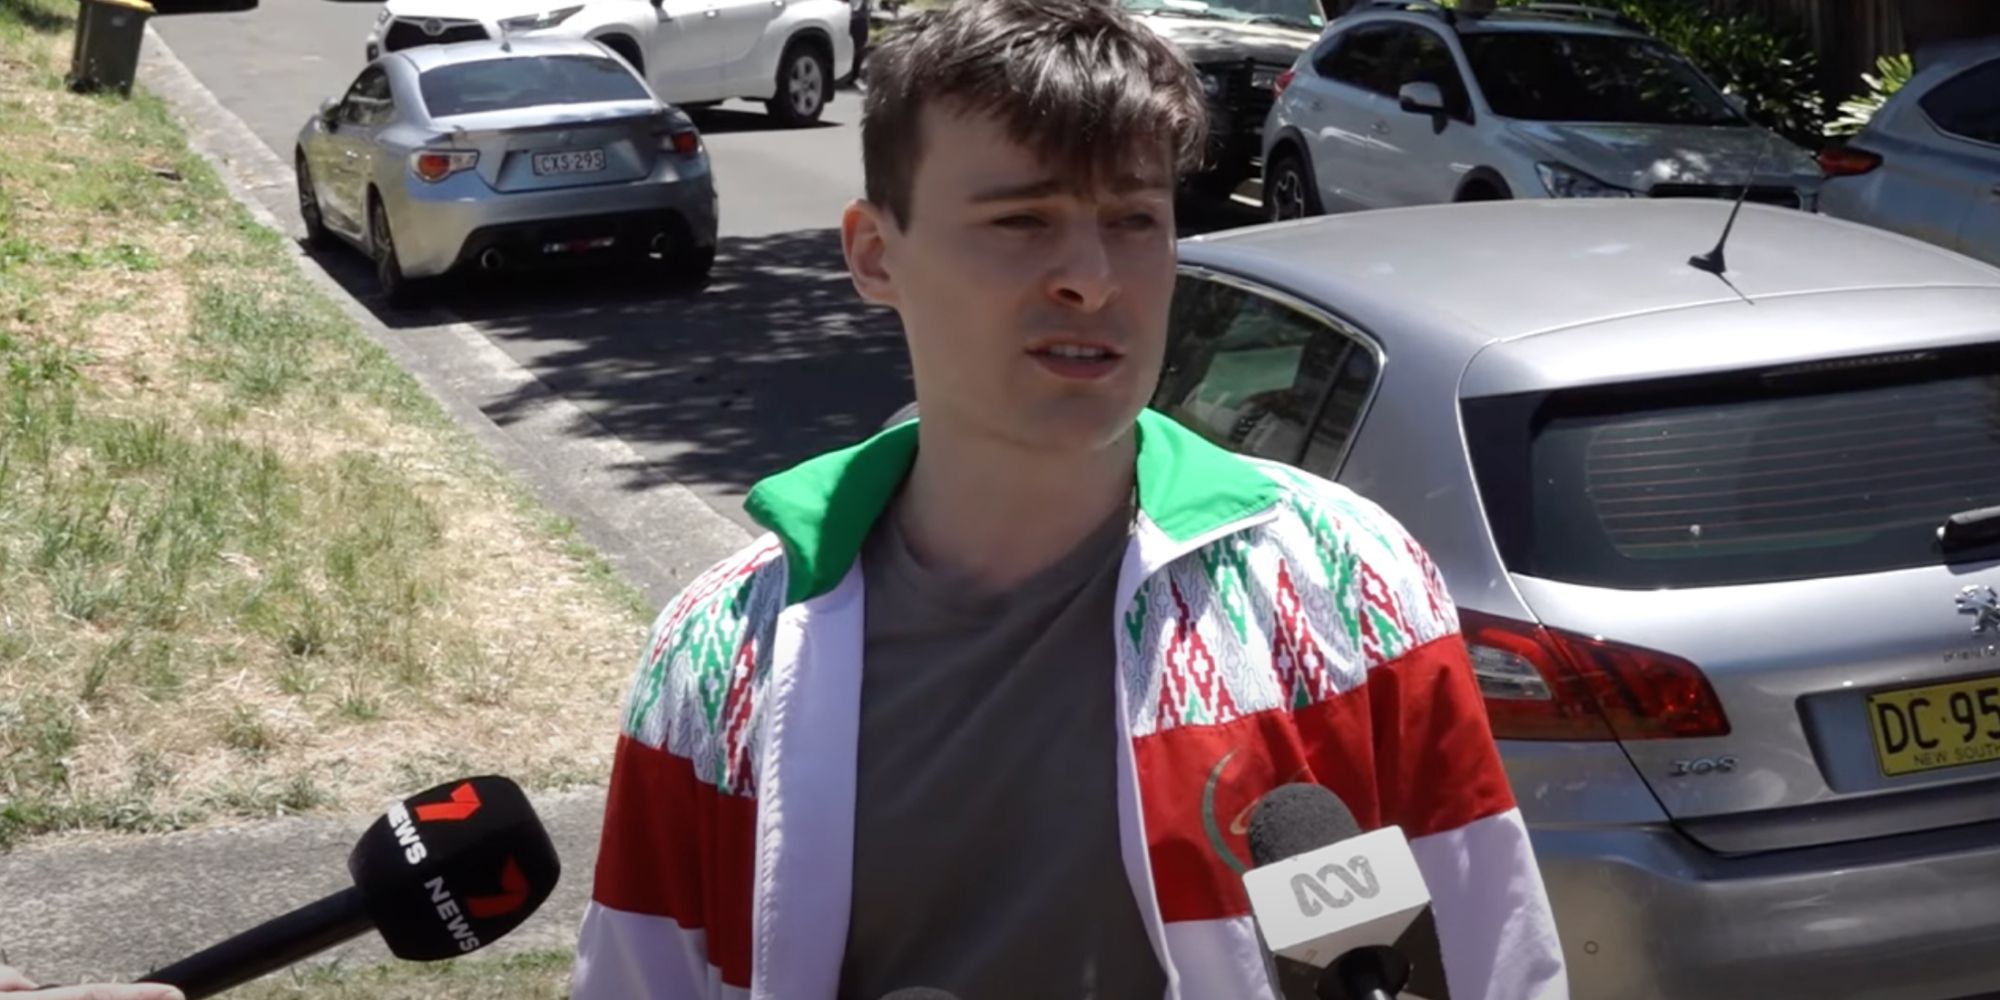 A man being interviewed in his neighborhood with his car behind him